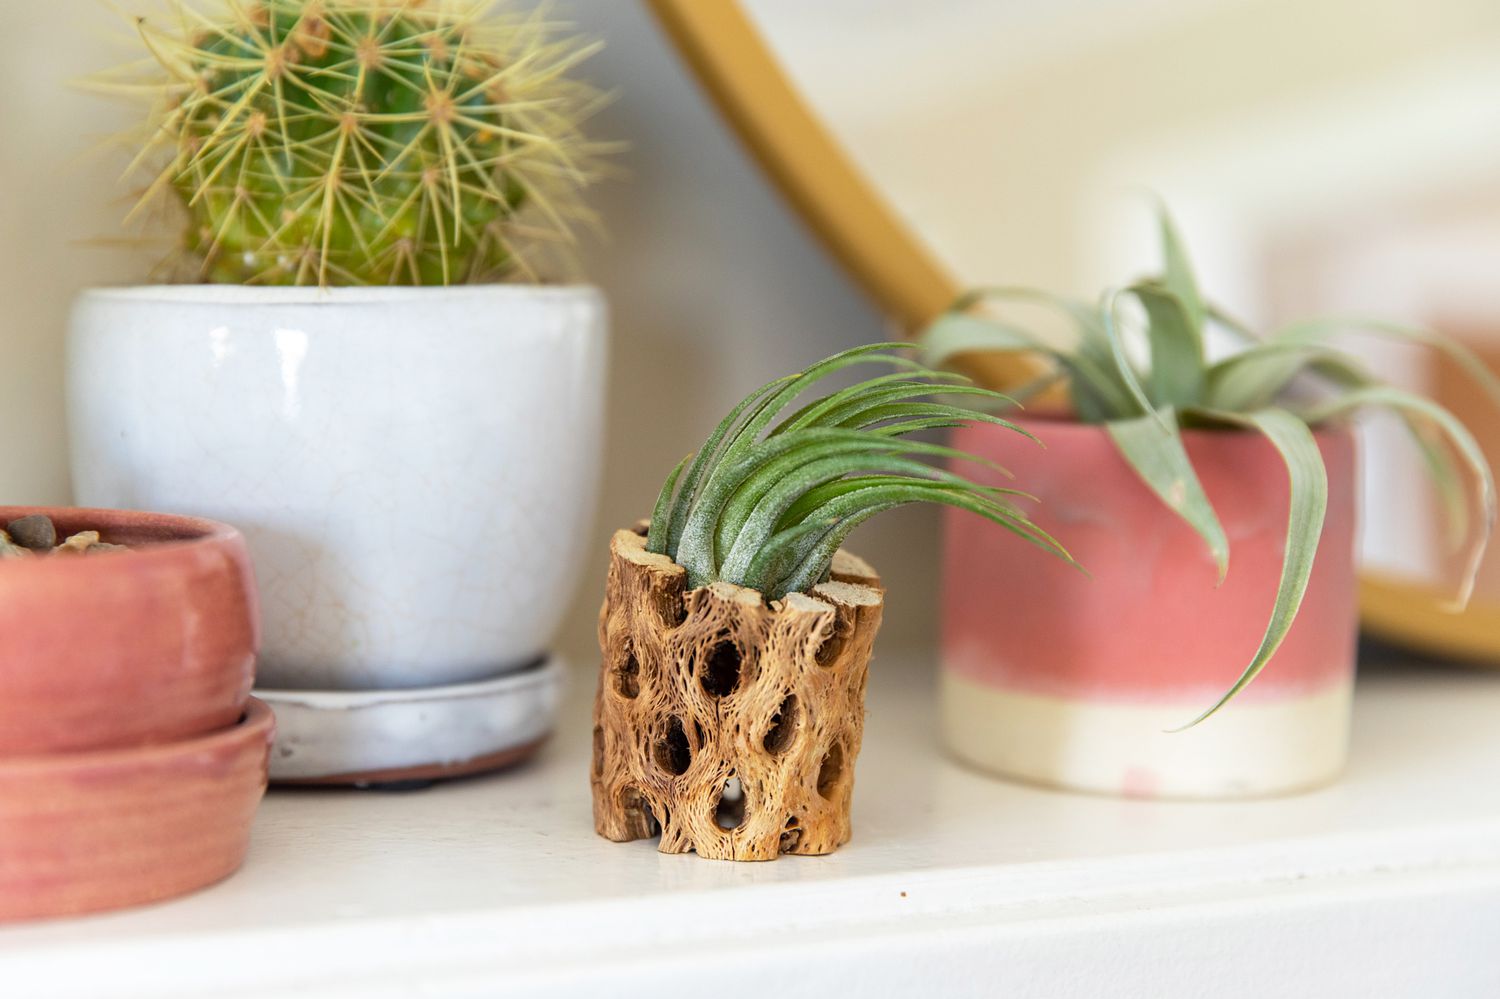 Tillandsia kolbii air plant in a wooden holder next to other airplant and small cactus